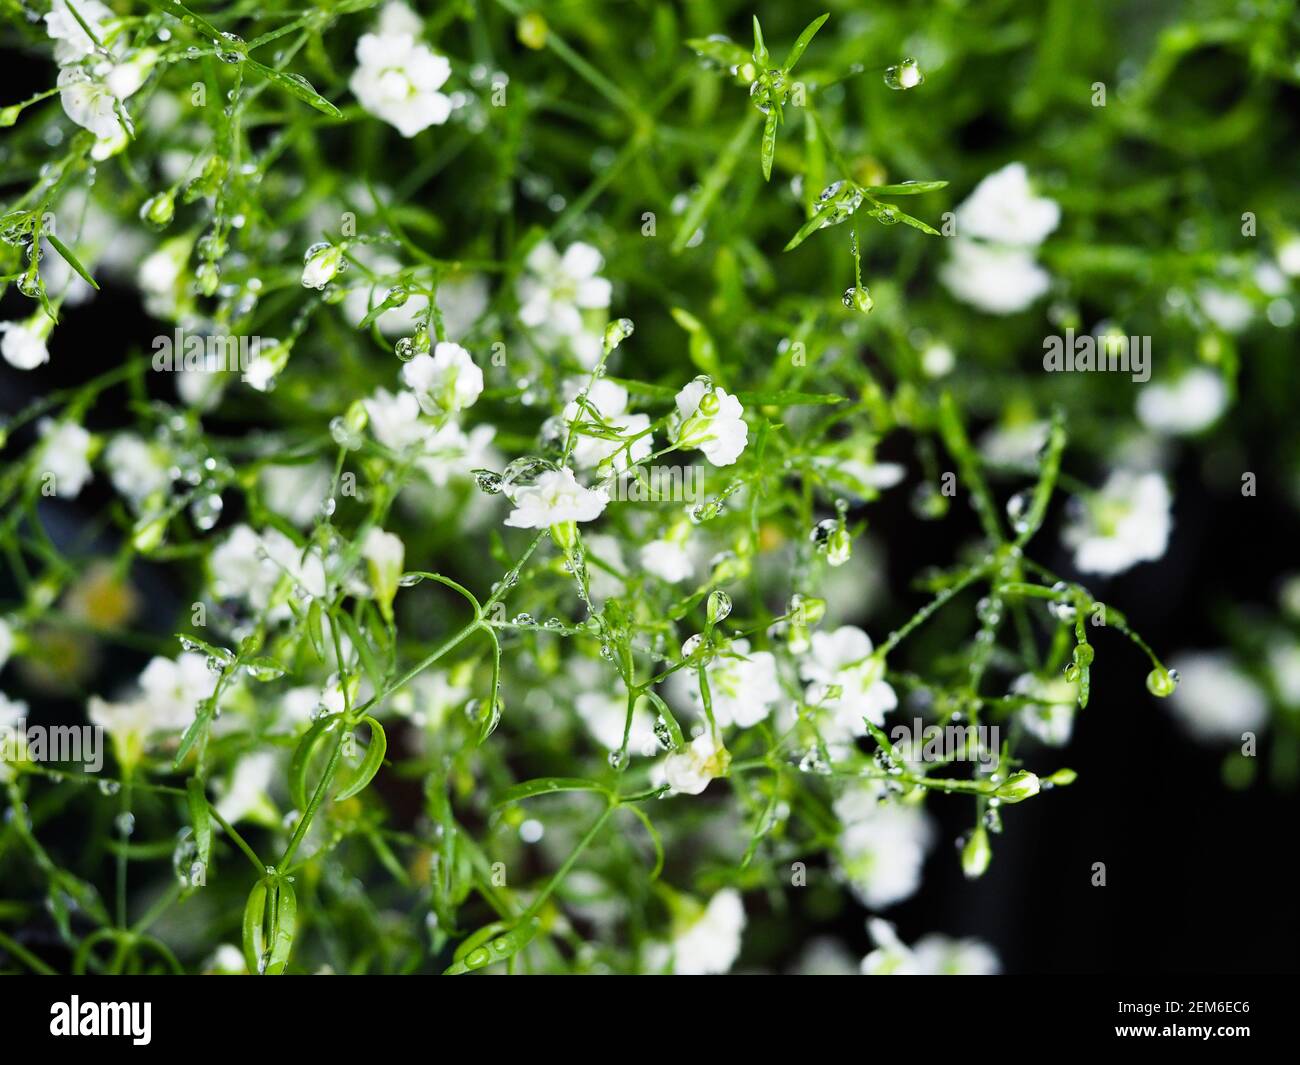 Gypsophila, or Gypsy, delicate tiny white semi-double flowers in Summer on this small compact plant, covered in water droplets Stock Photo